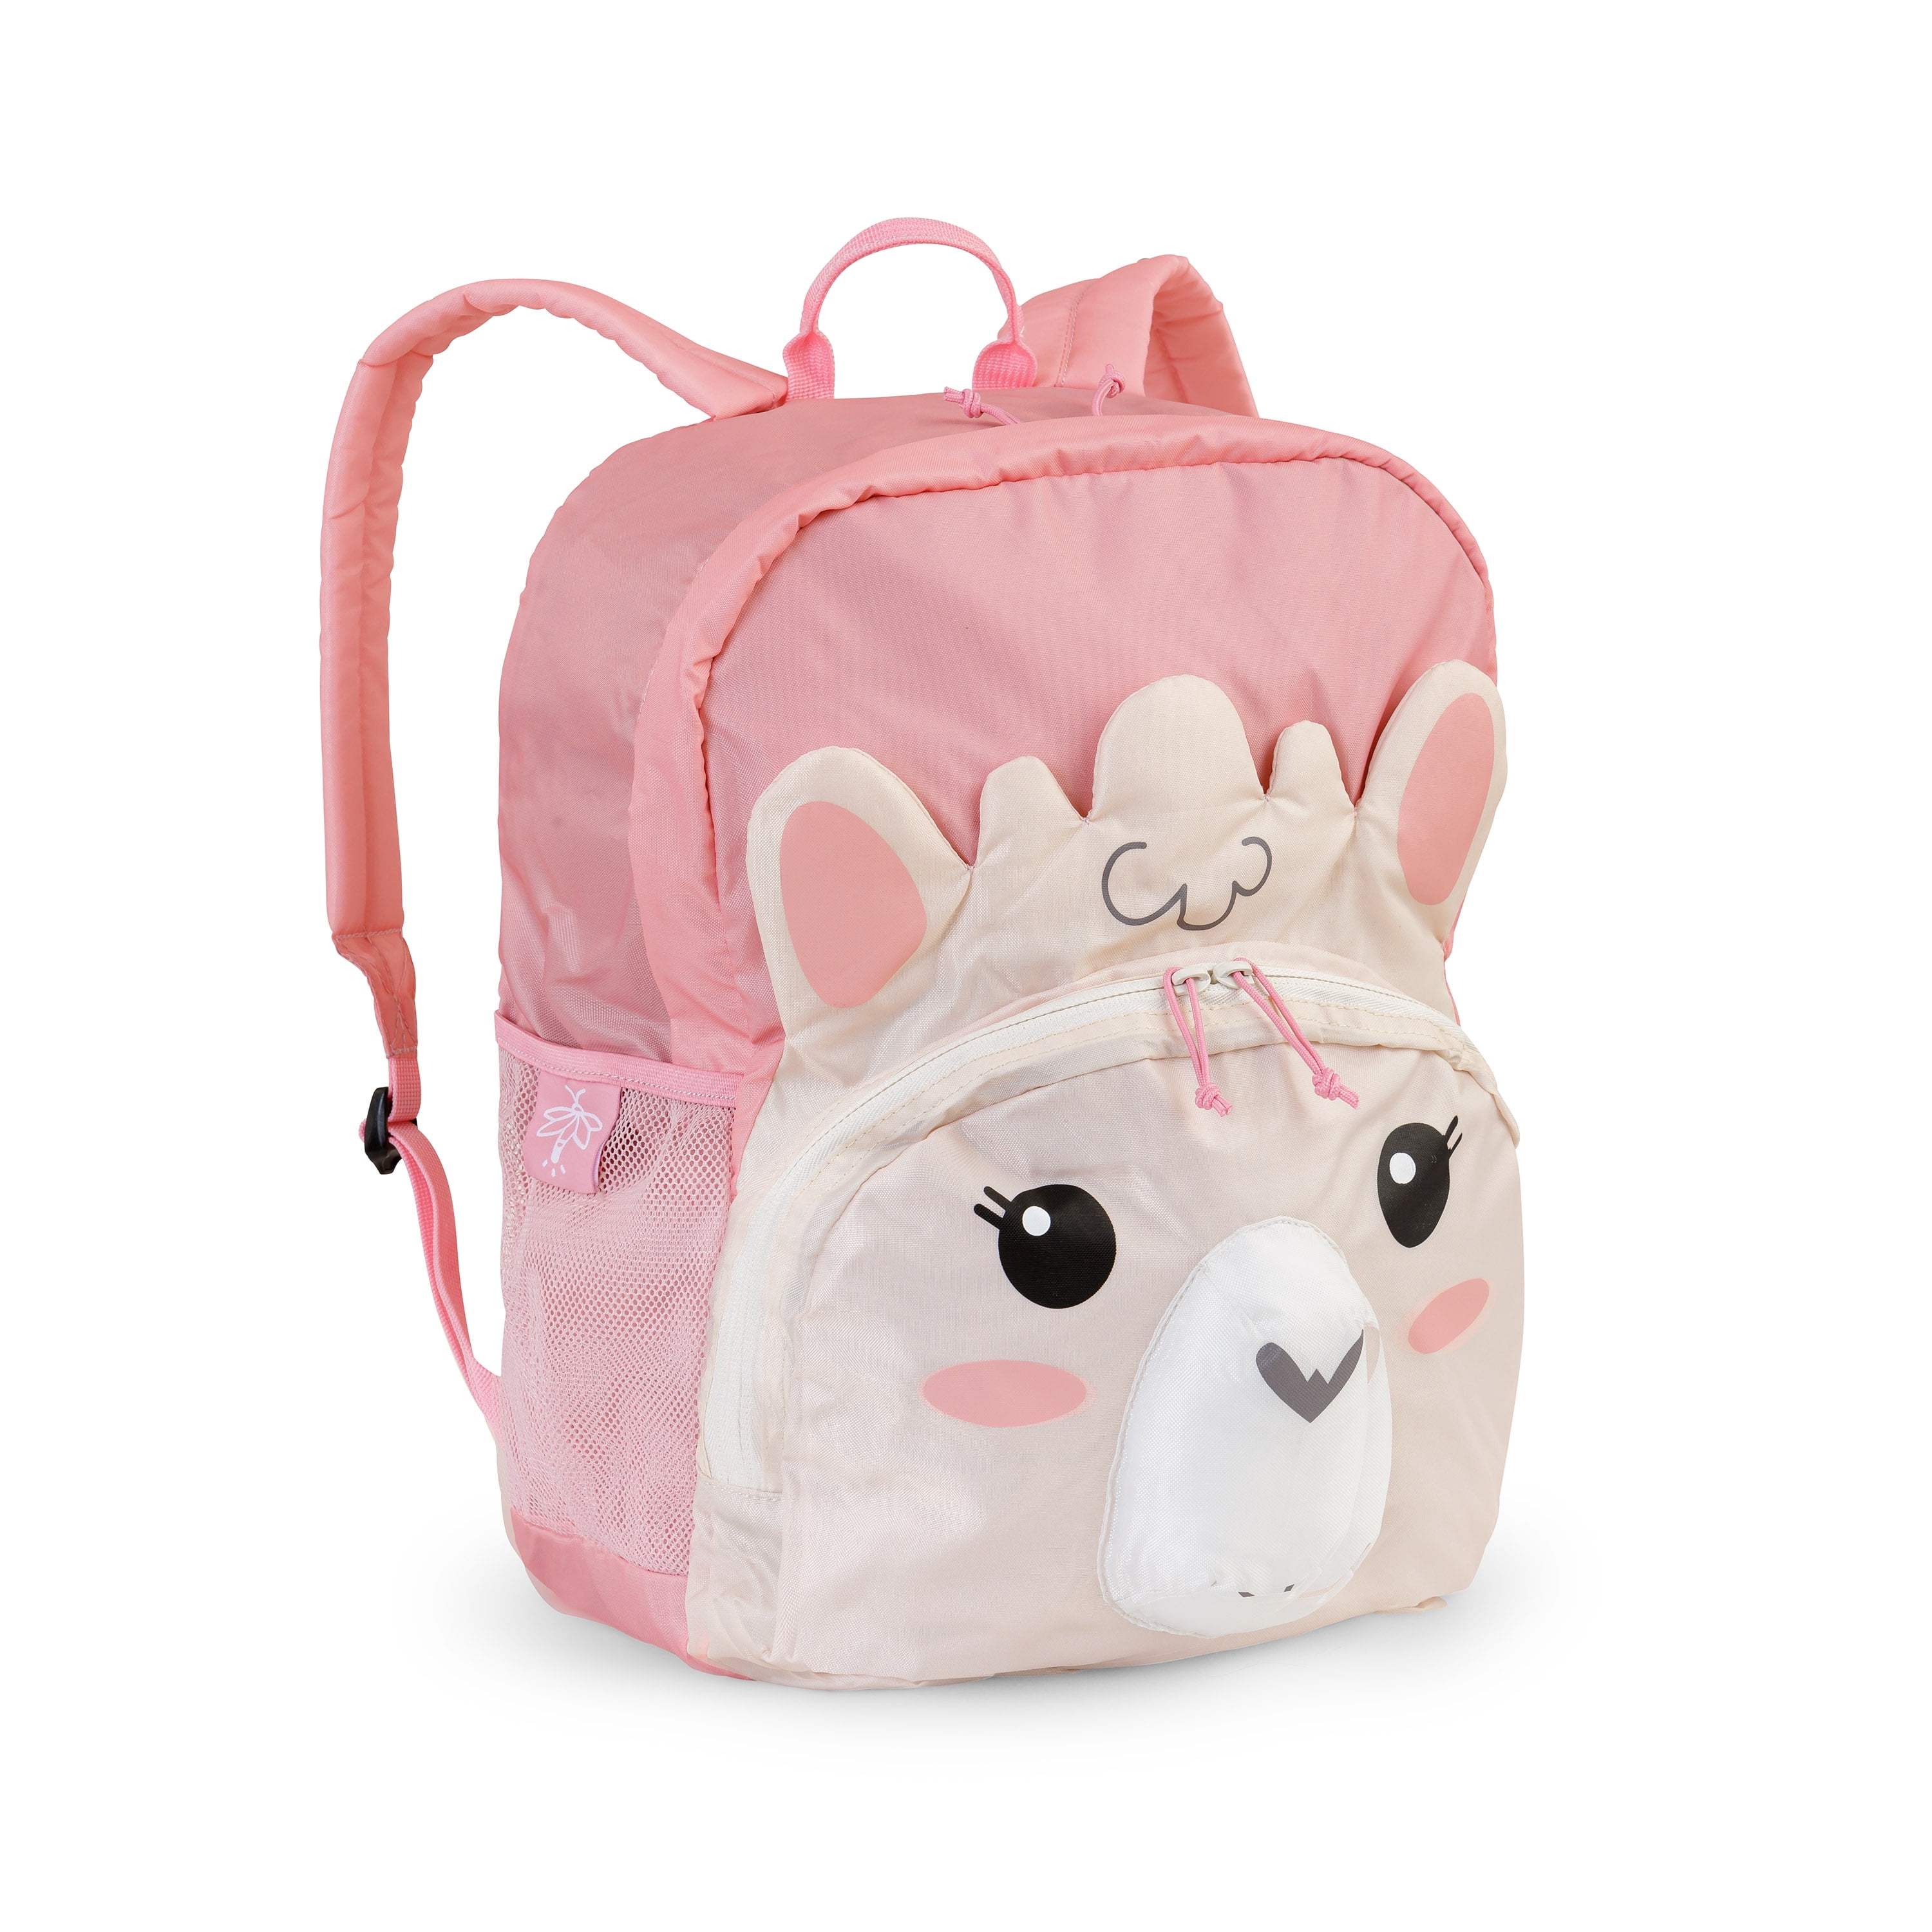 Firefly! Outdoor Gear Sparkle The Unicorn Kid's Backpack - Cream/Pink (15 liter), Unisex, Size: 15 Large